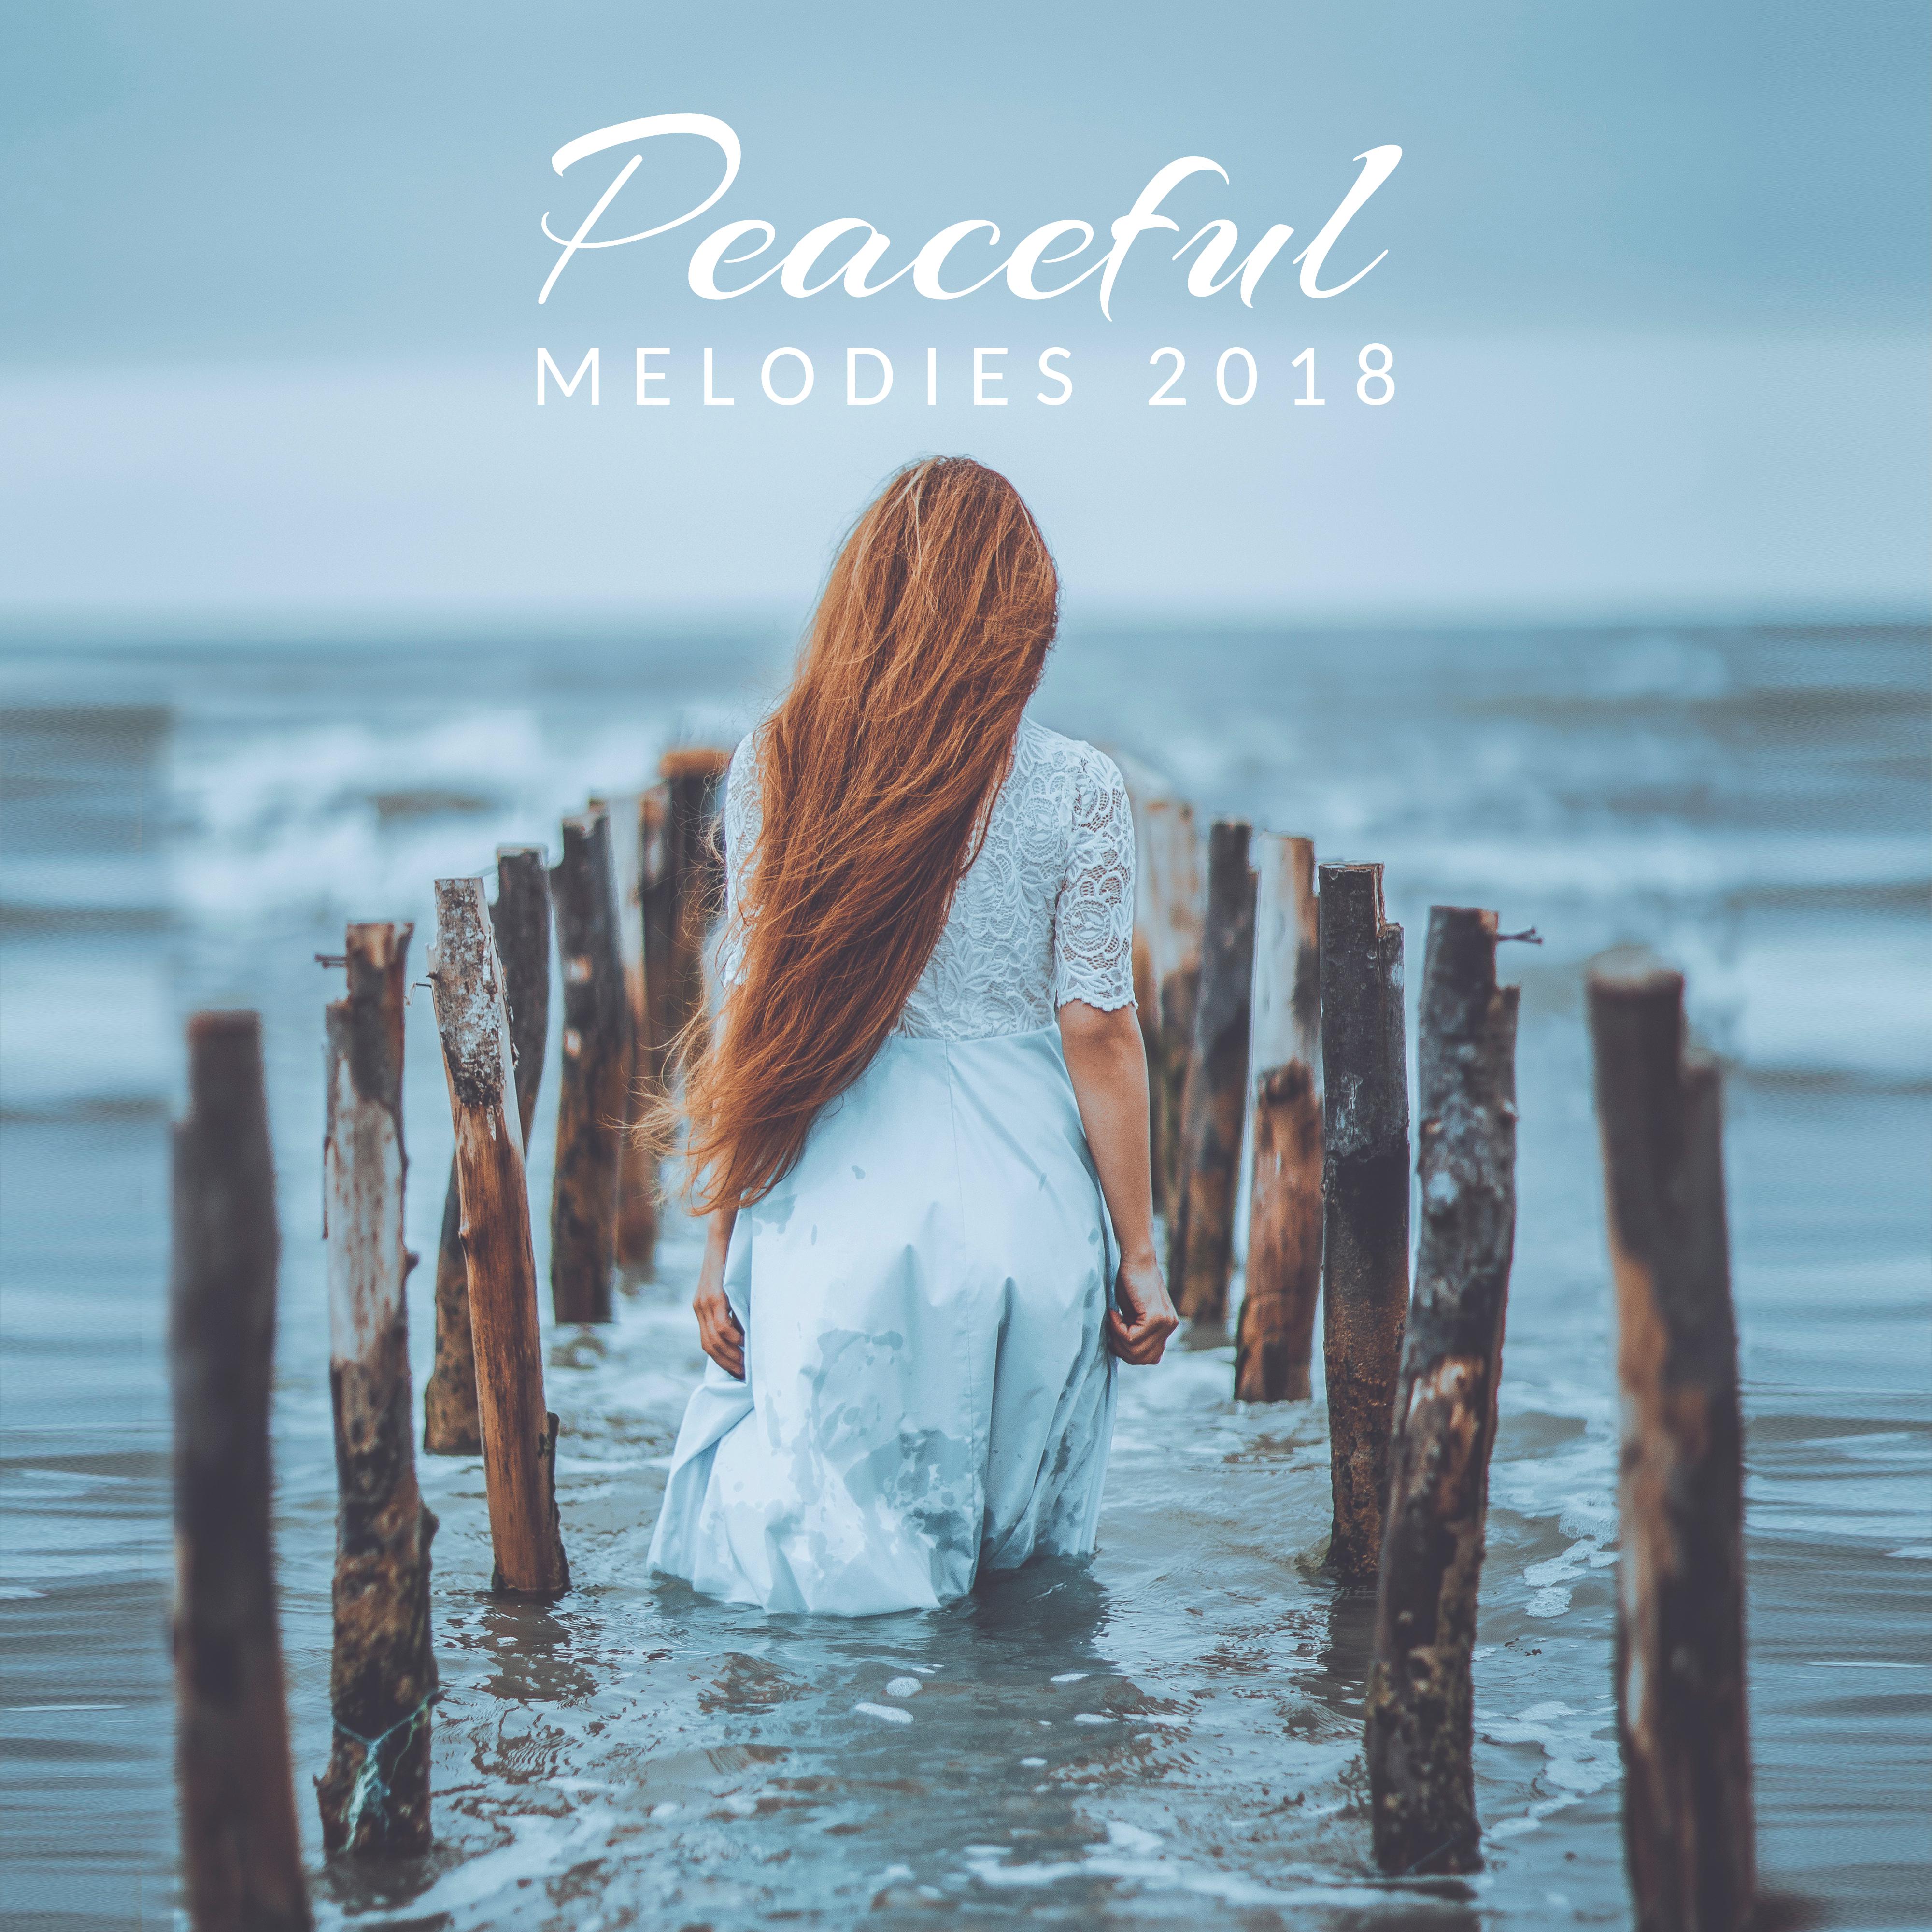 Peaceful Melodies 2018